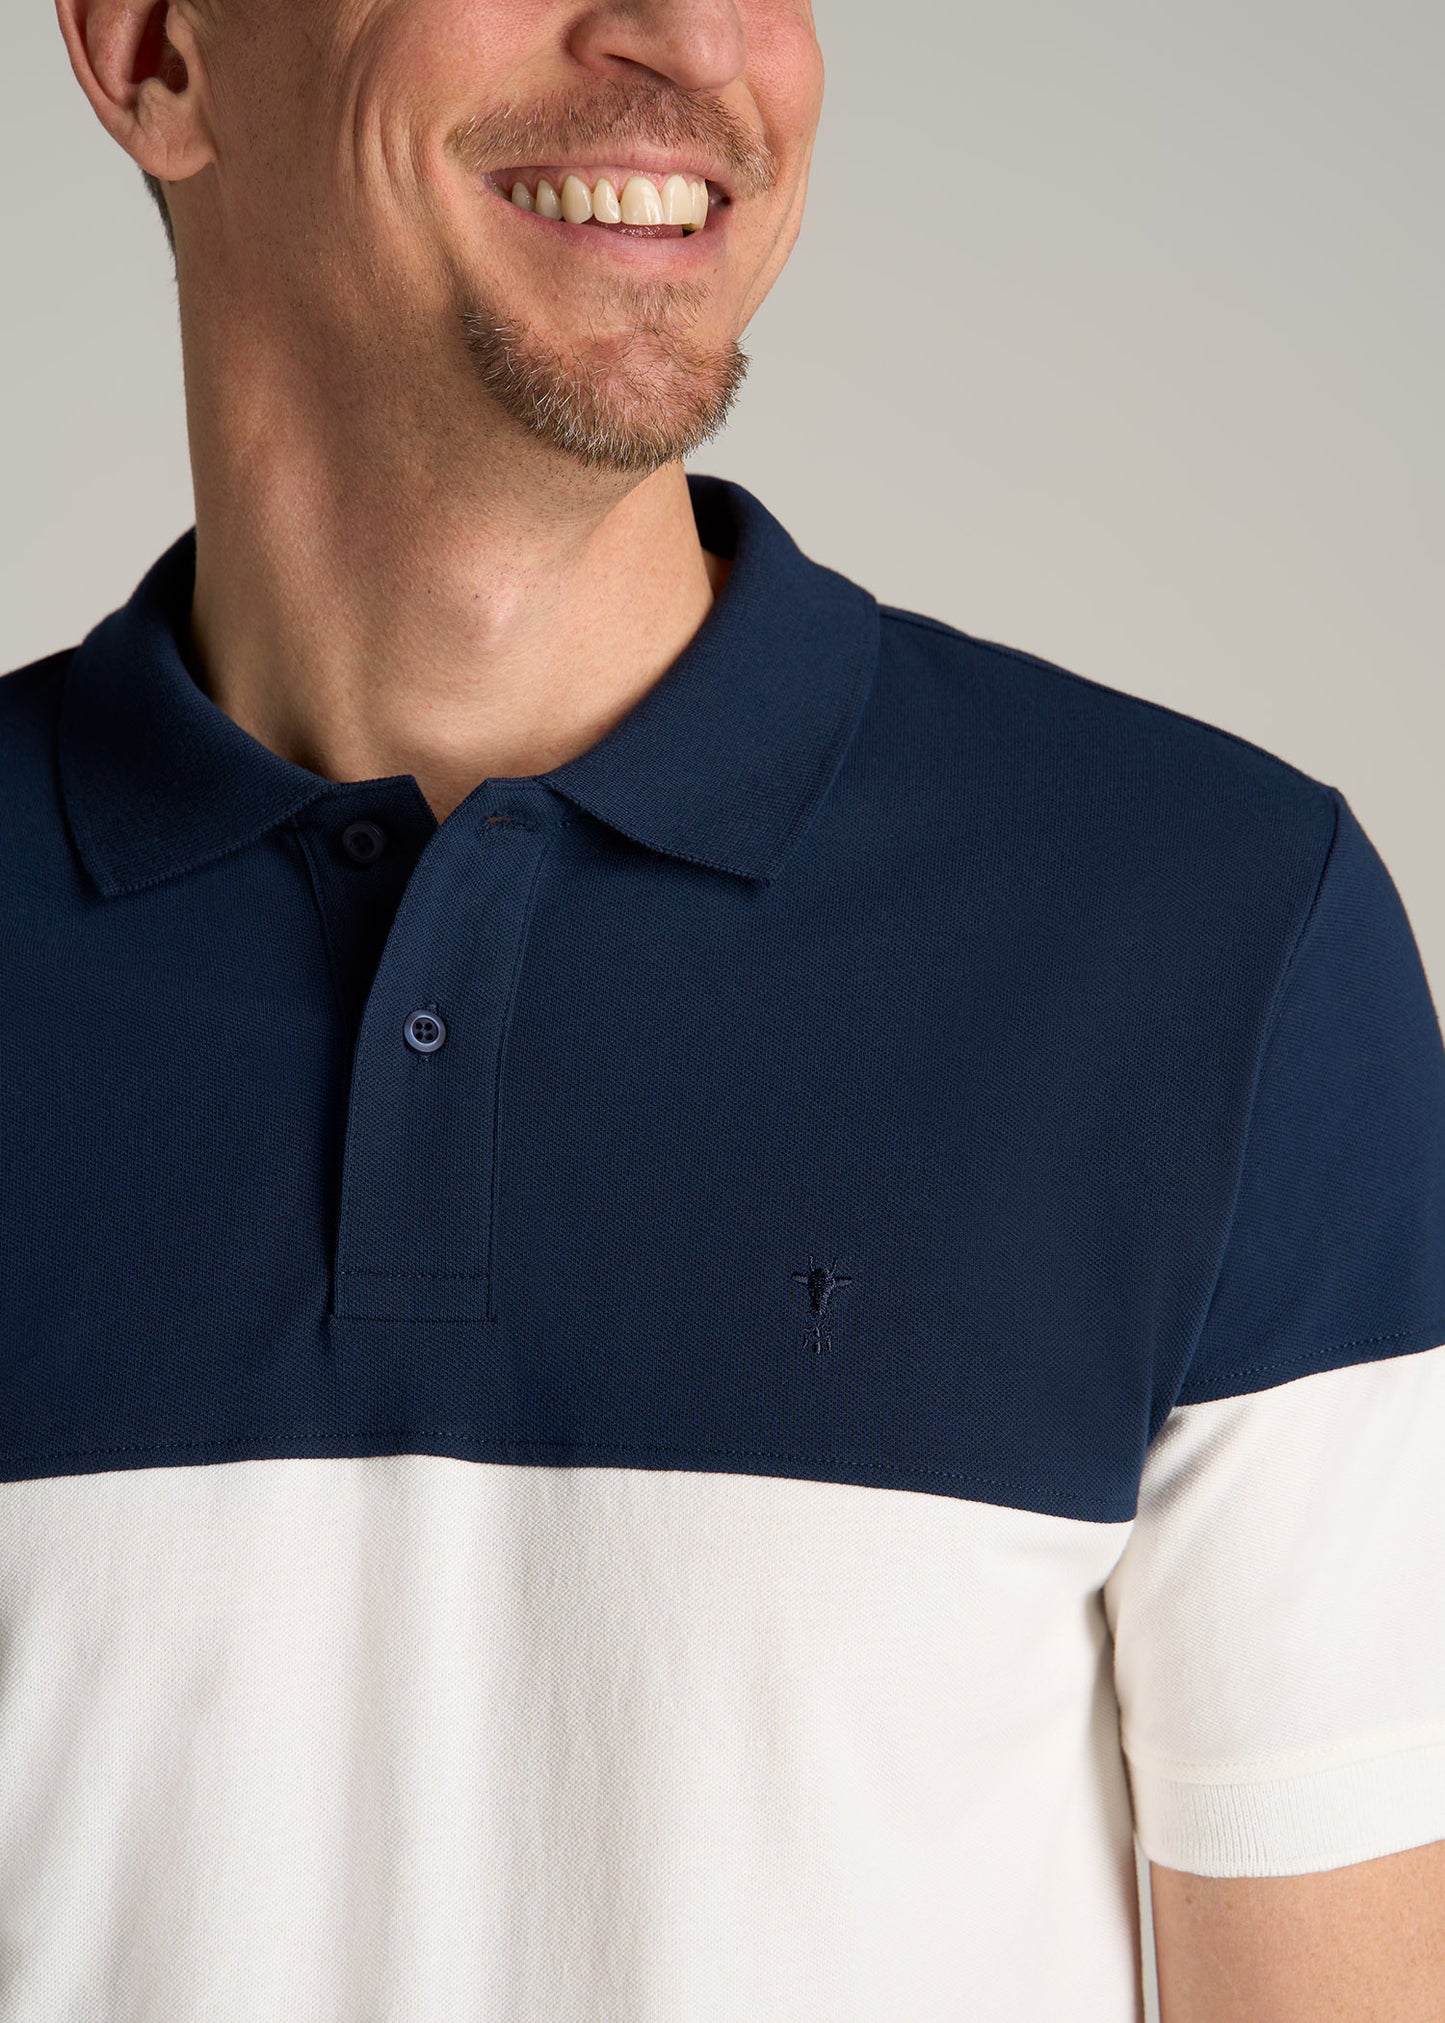 Classic Color-Block Tall Men's Polo Shirt in Marine Navy and Ecru